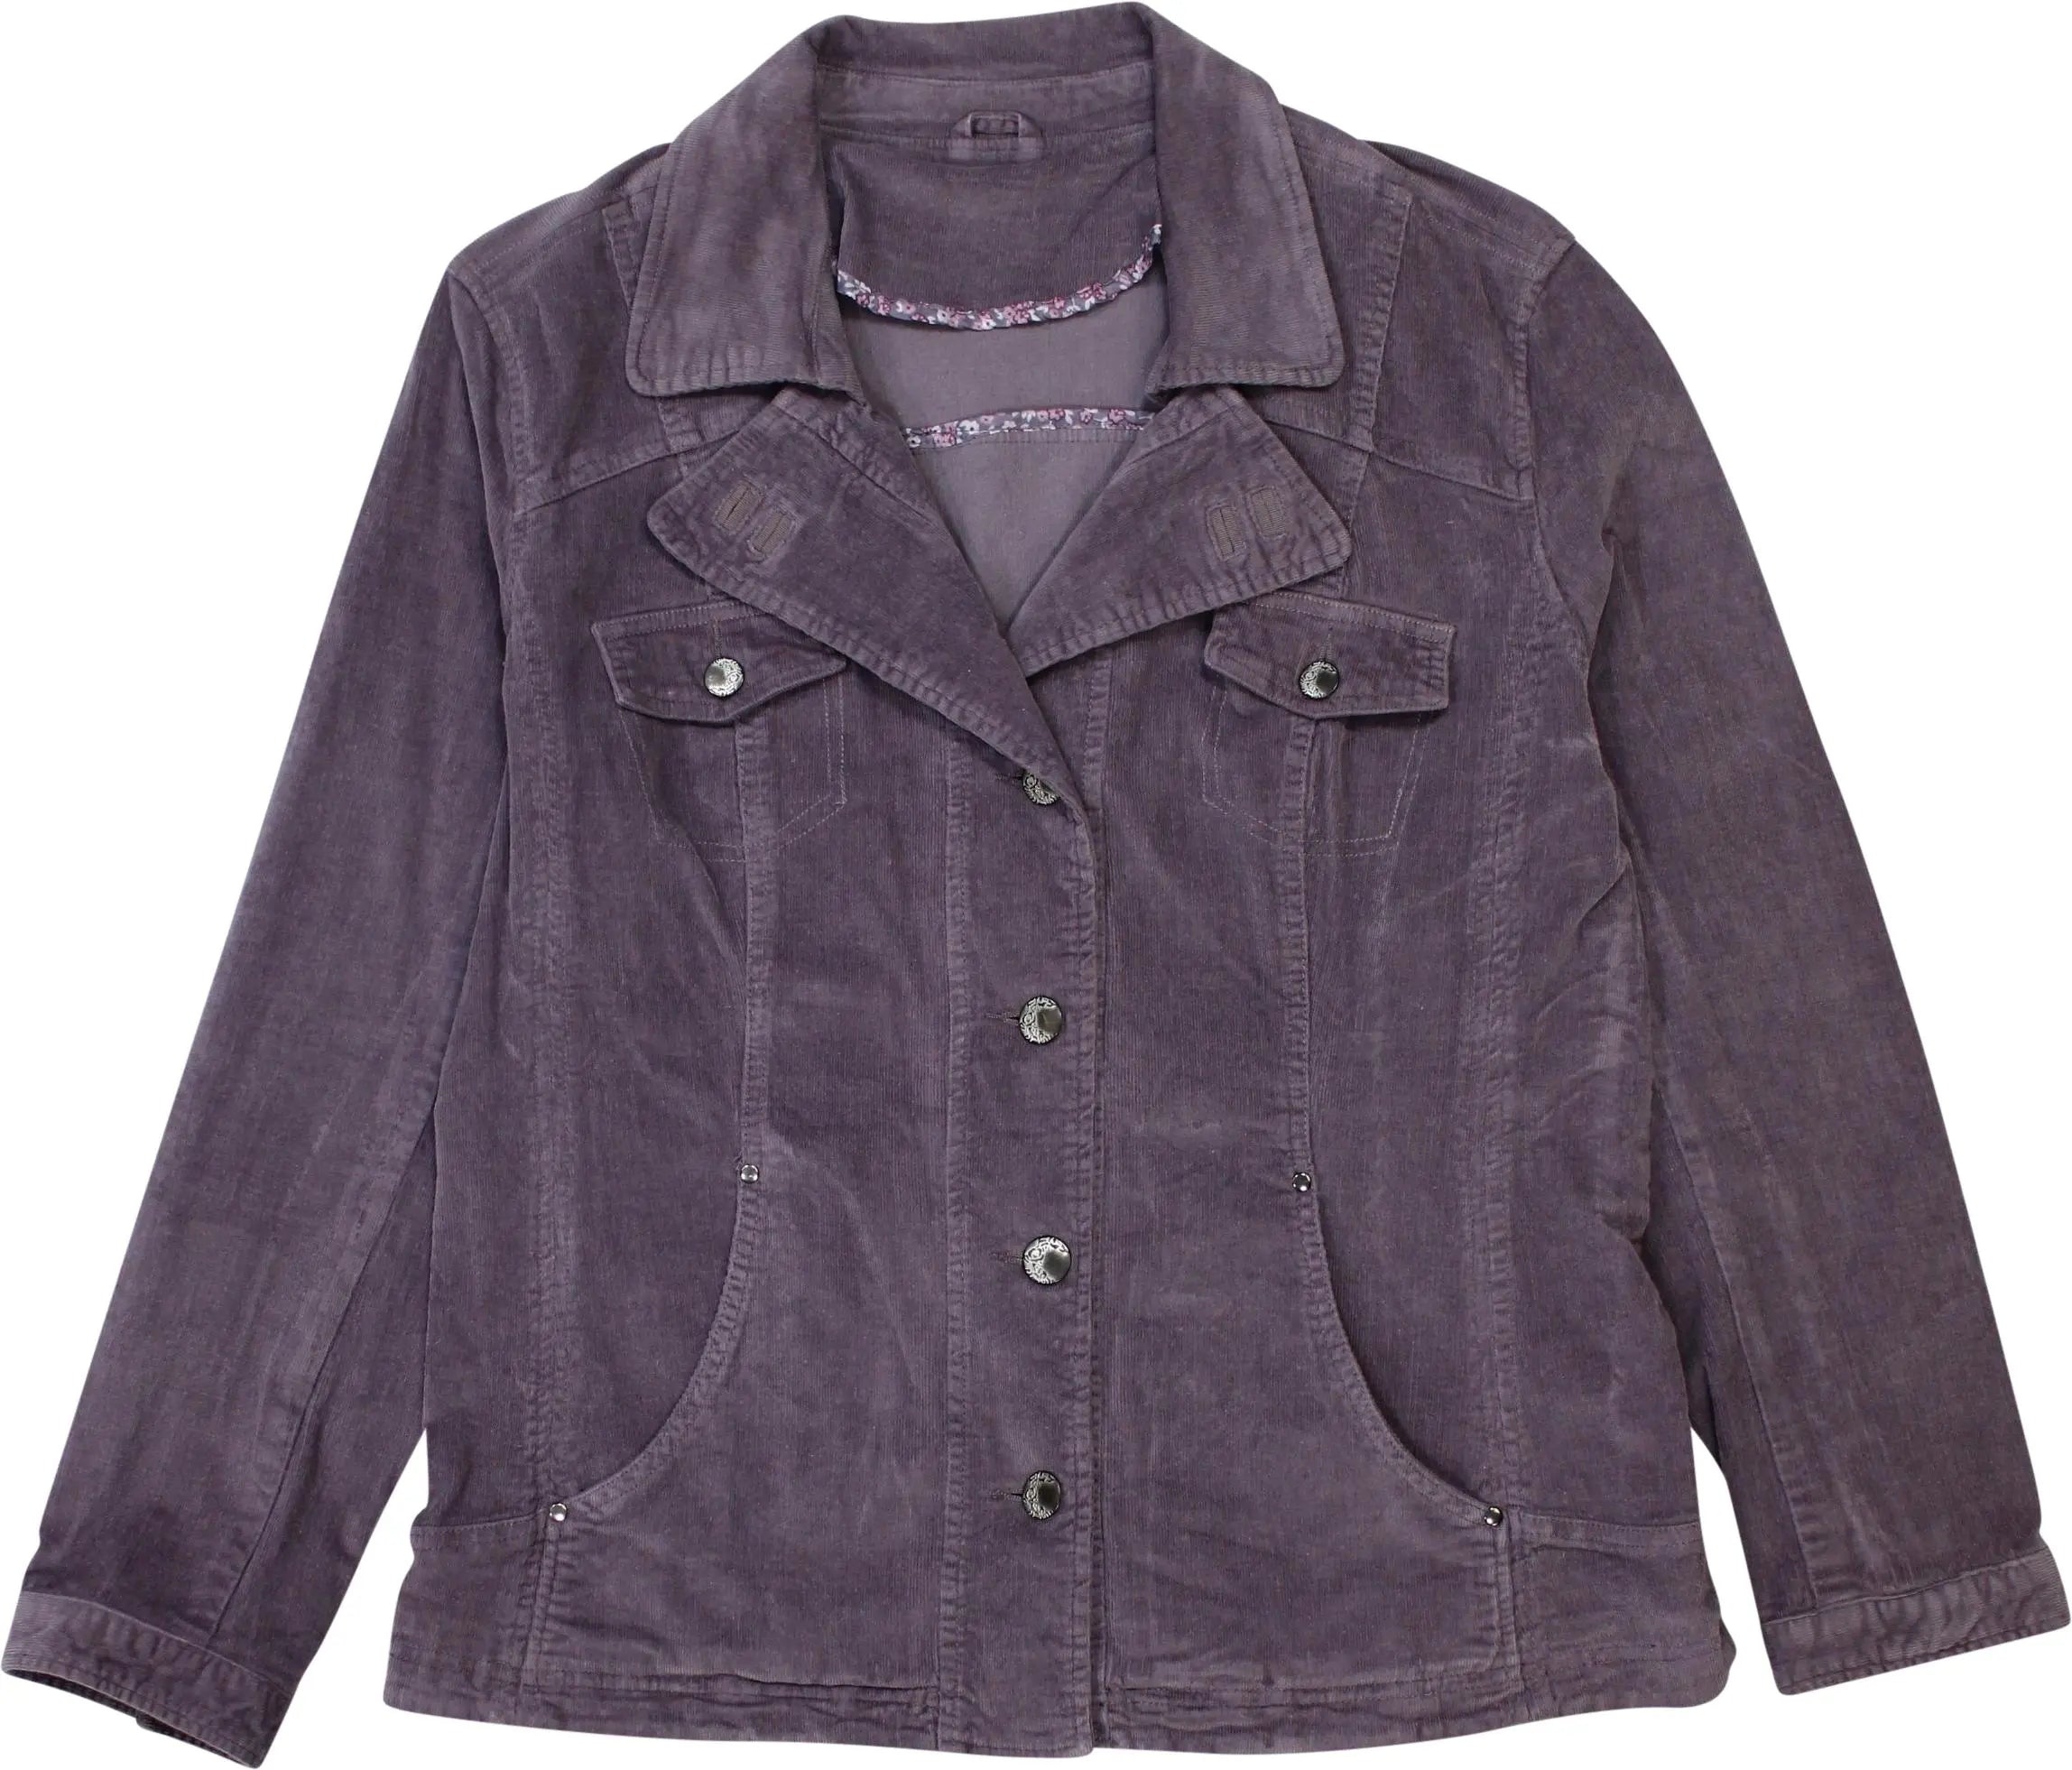 Unknown - Purple Corduroy Jacket- ThriftTale.com - Vintage and second handclothing